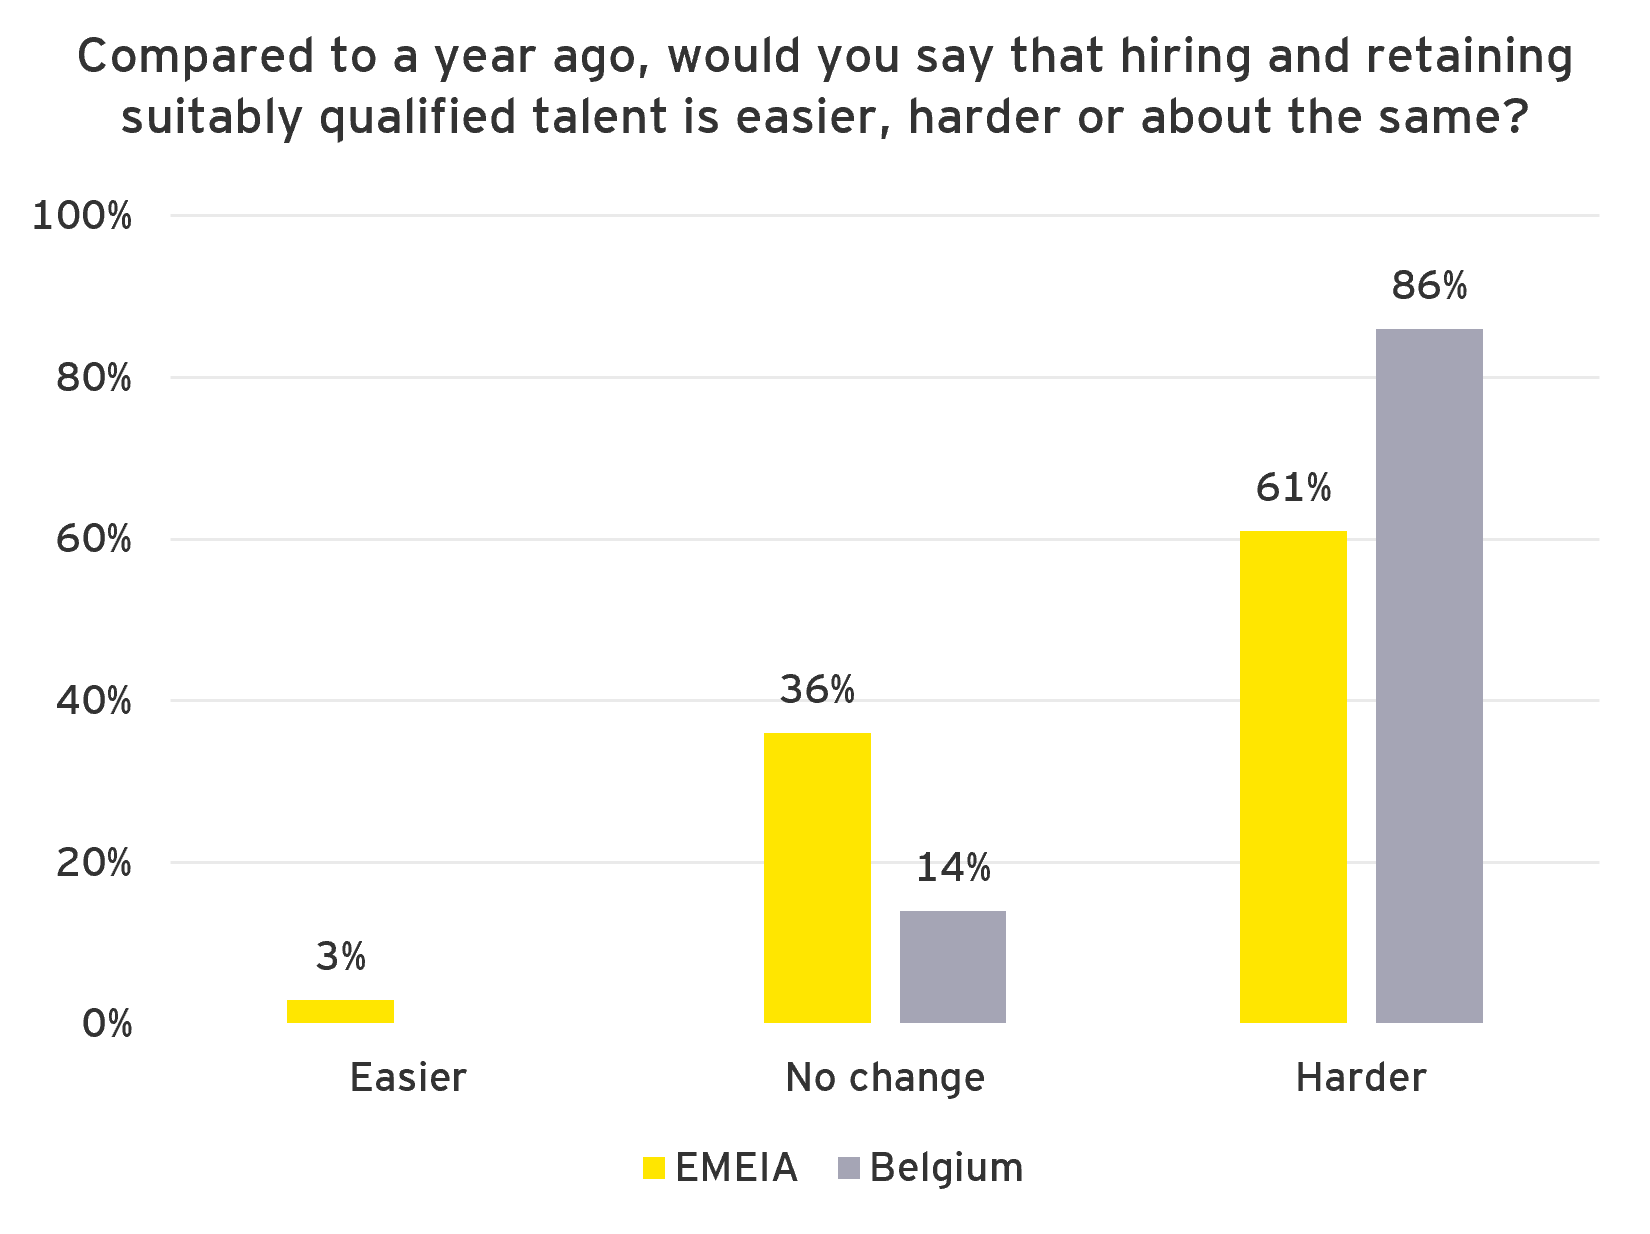 Graph: Compared to a year ago, would you say that hiring and retaining suitably qualified talent is easier, harder or about the same?